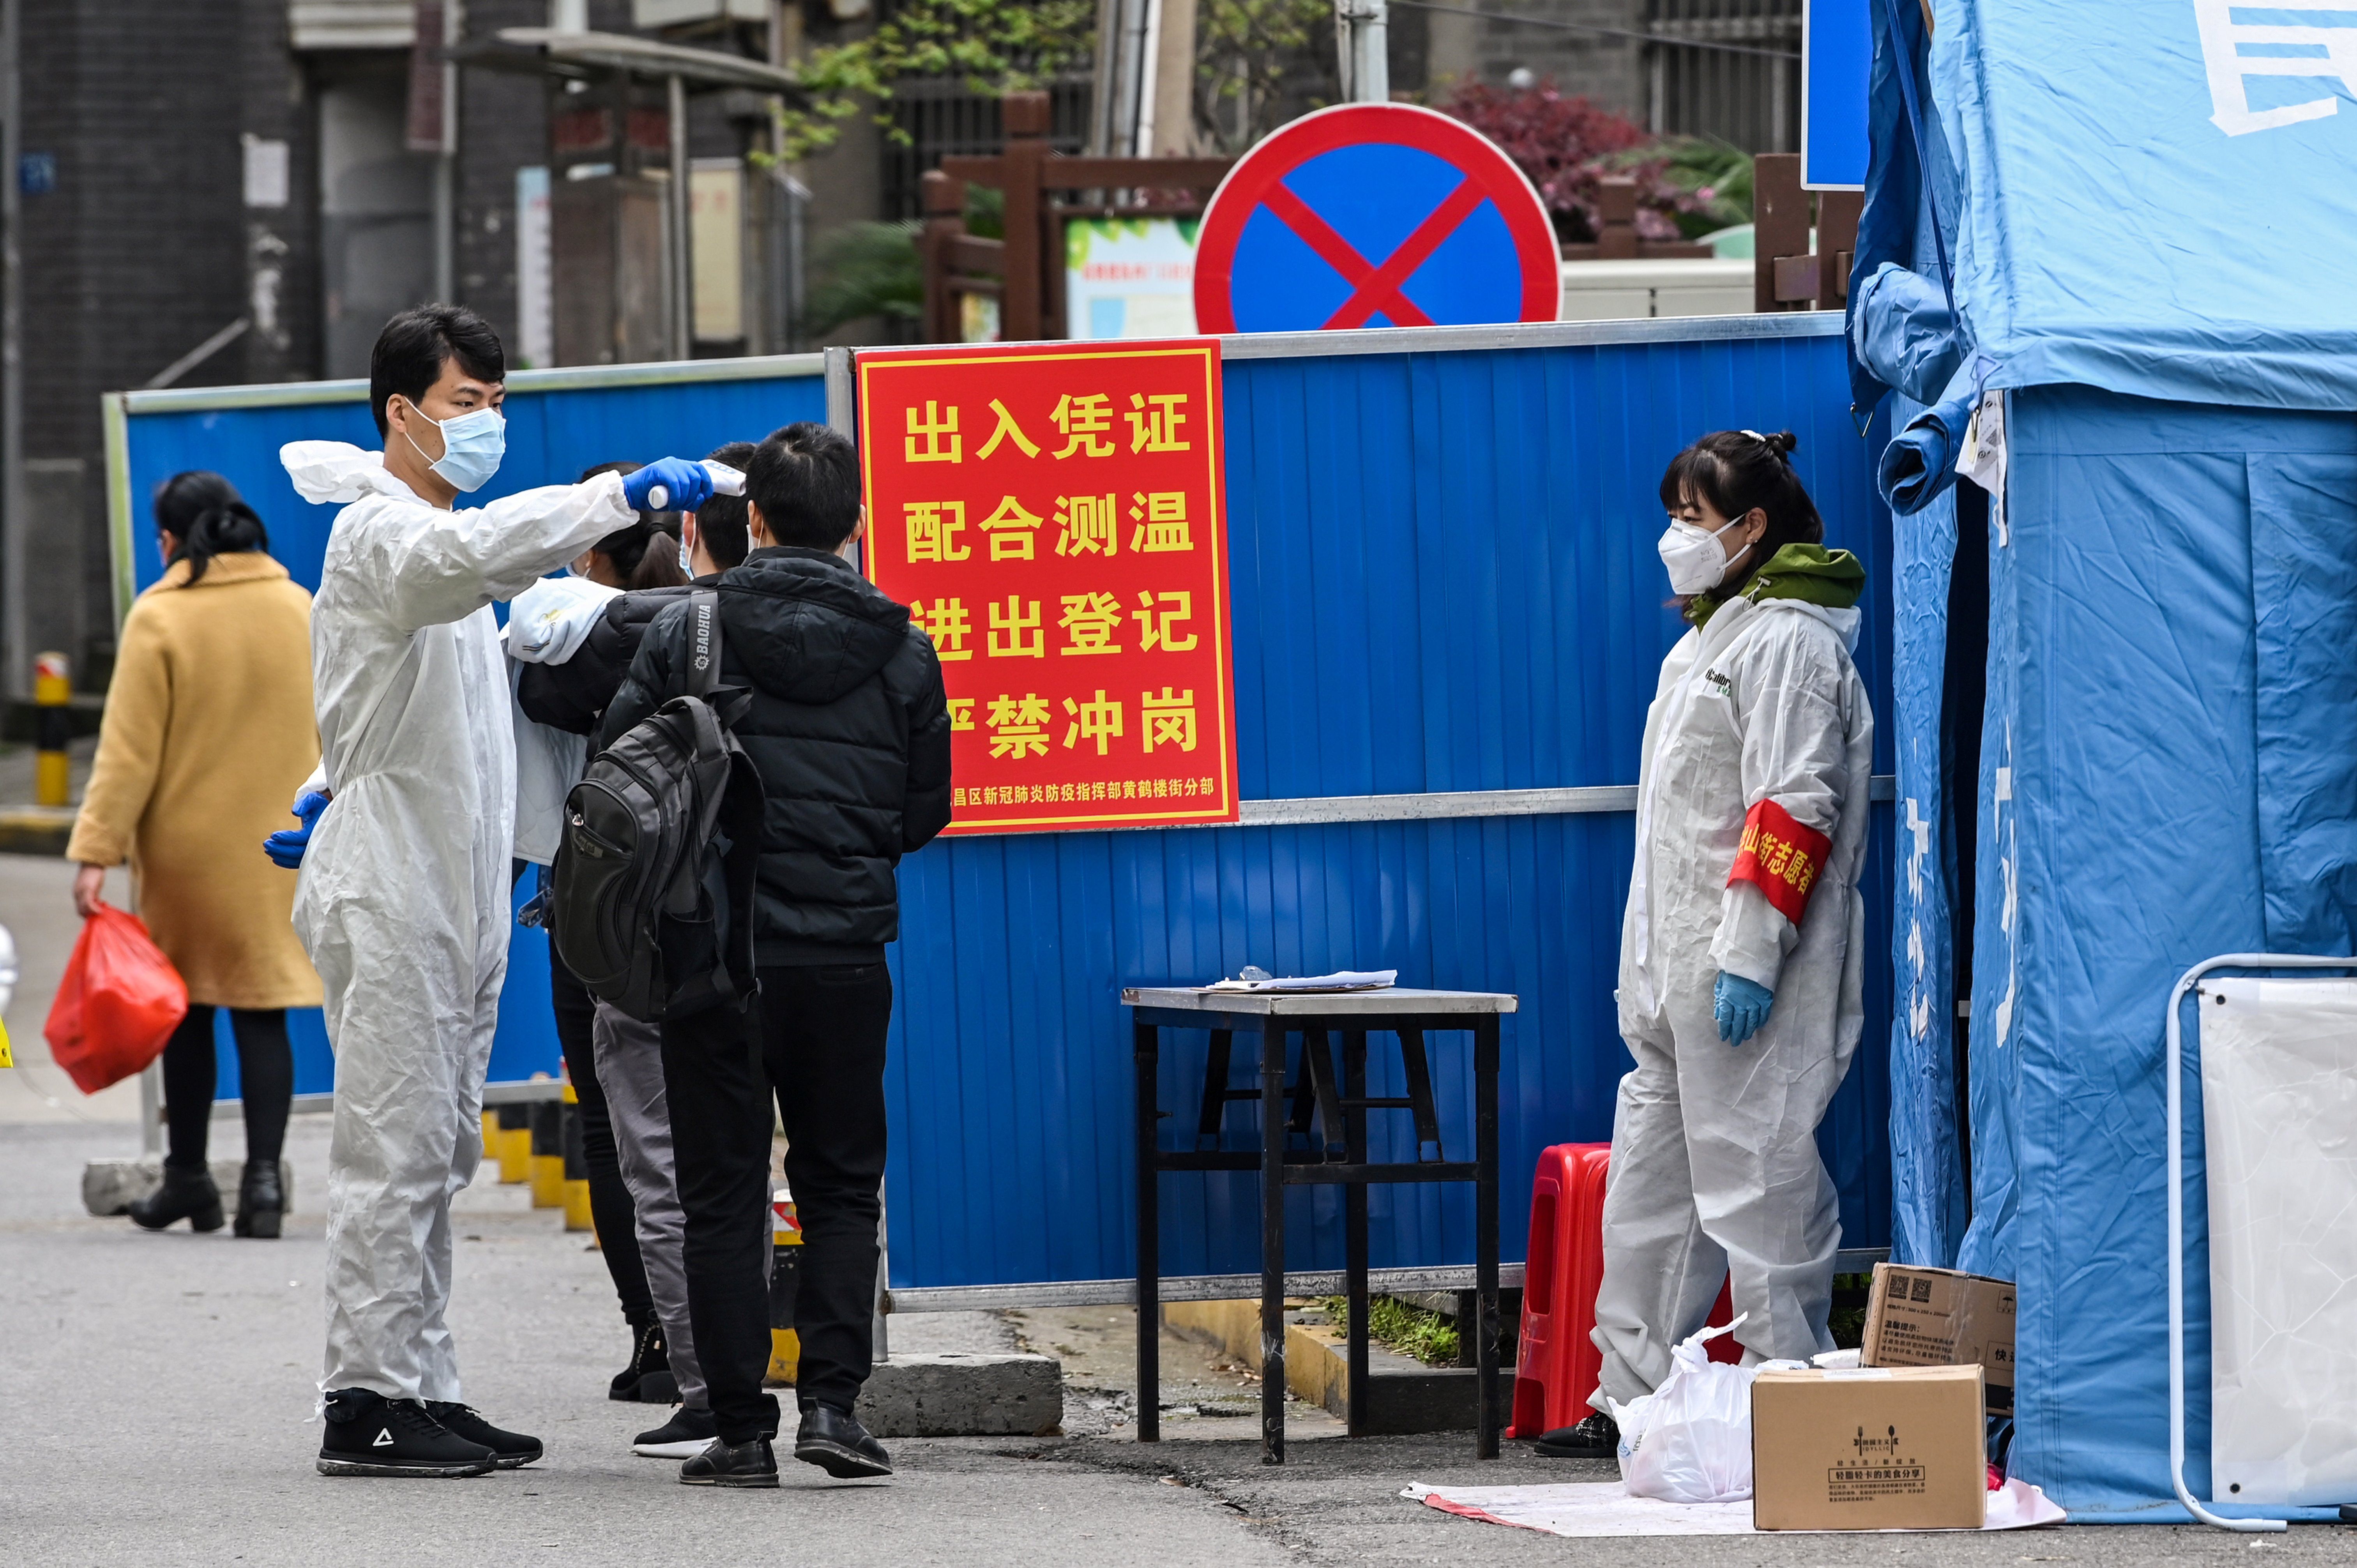 A man wearing a protective suit takes the temperature in a neighborhood in Wuhan, in China's central Hubei province on March 30, 2020